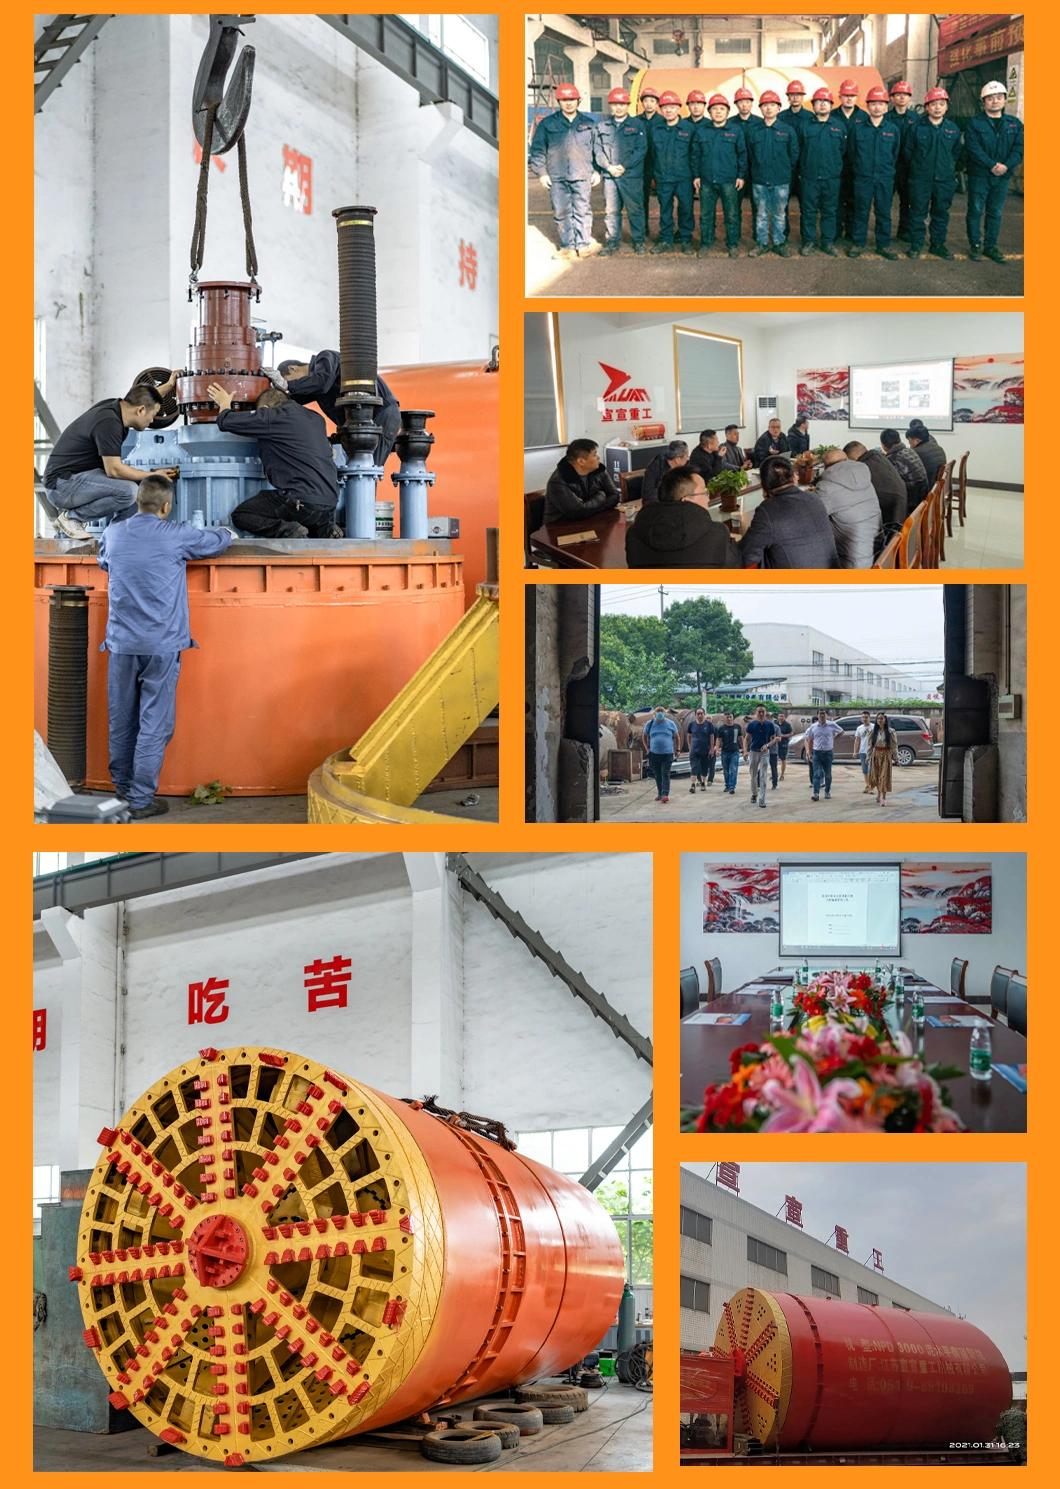 Xuan Xuan Trenchless Project Ysd3000 Rock Pipe Jacking Machine for Rcc